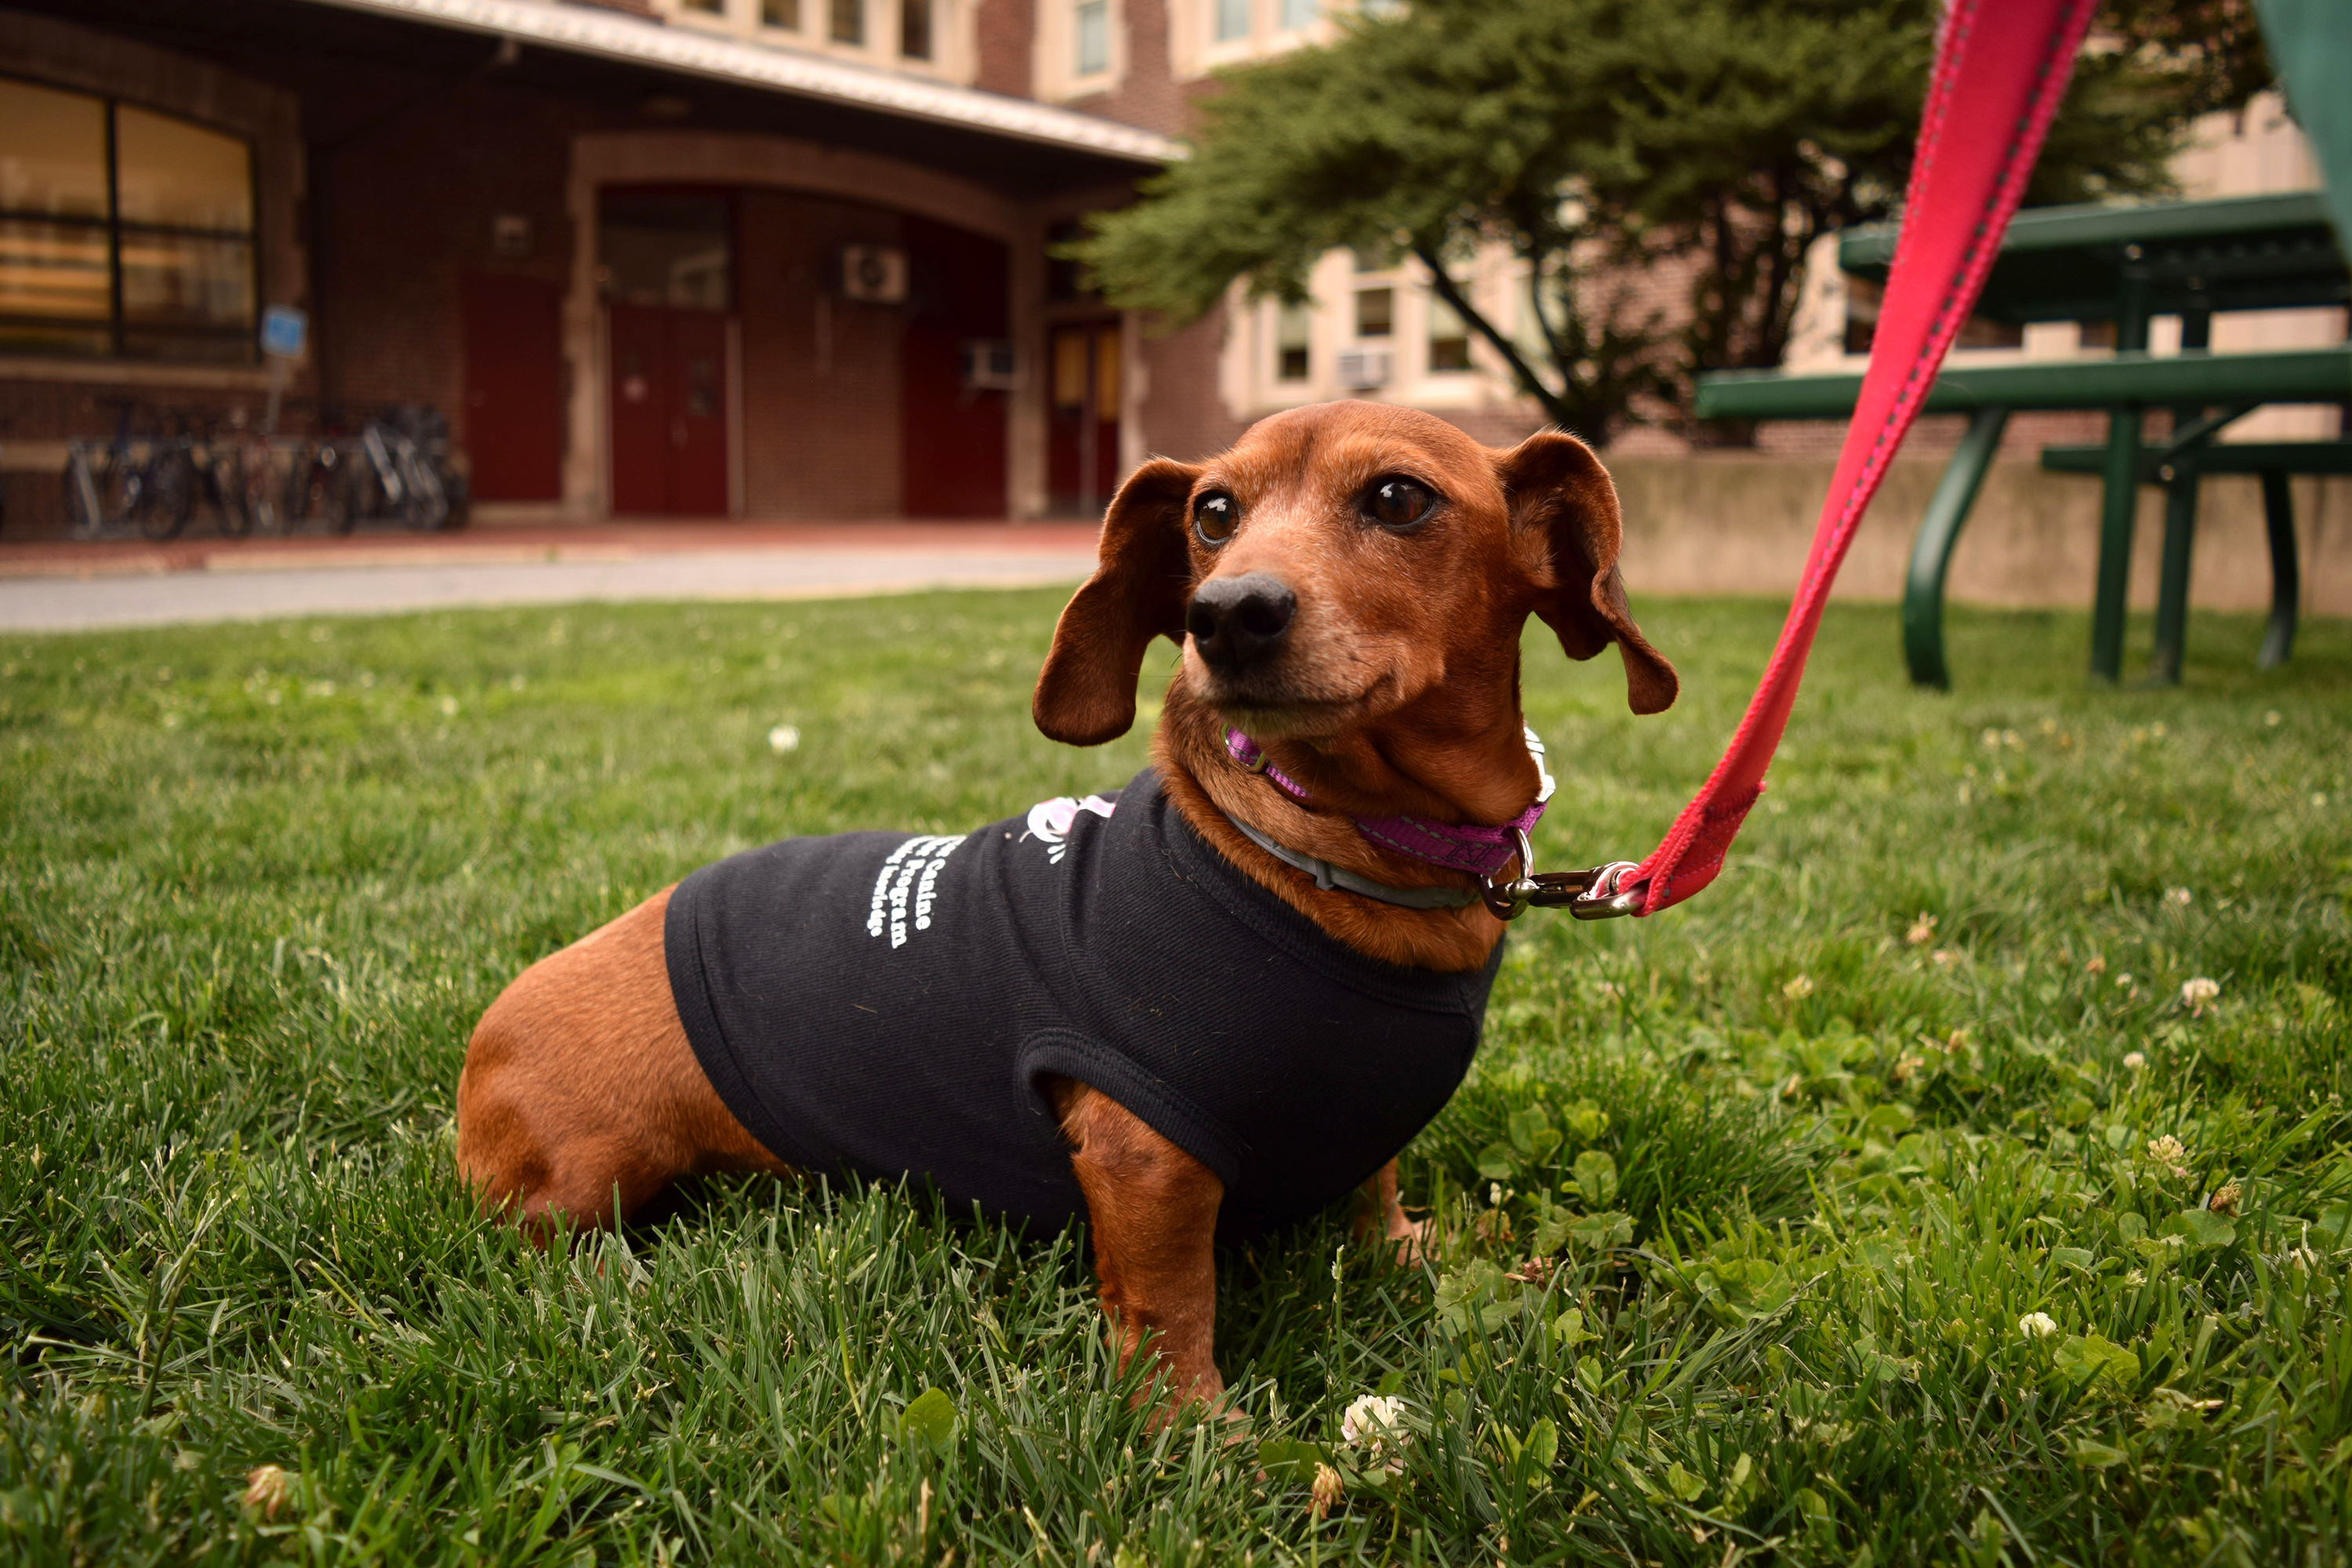 A dachshund on a leash wears a black shirt while standing in a lawn and gazing into the distance